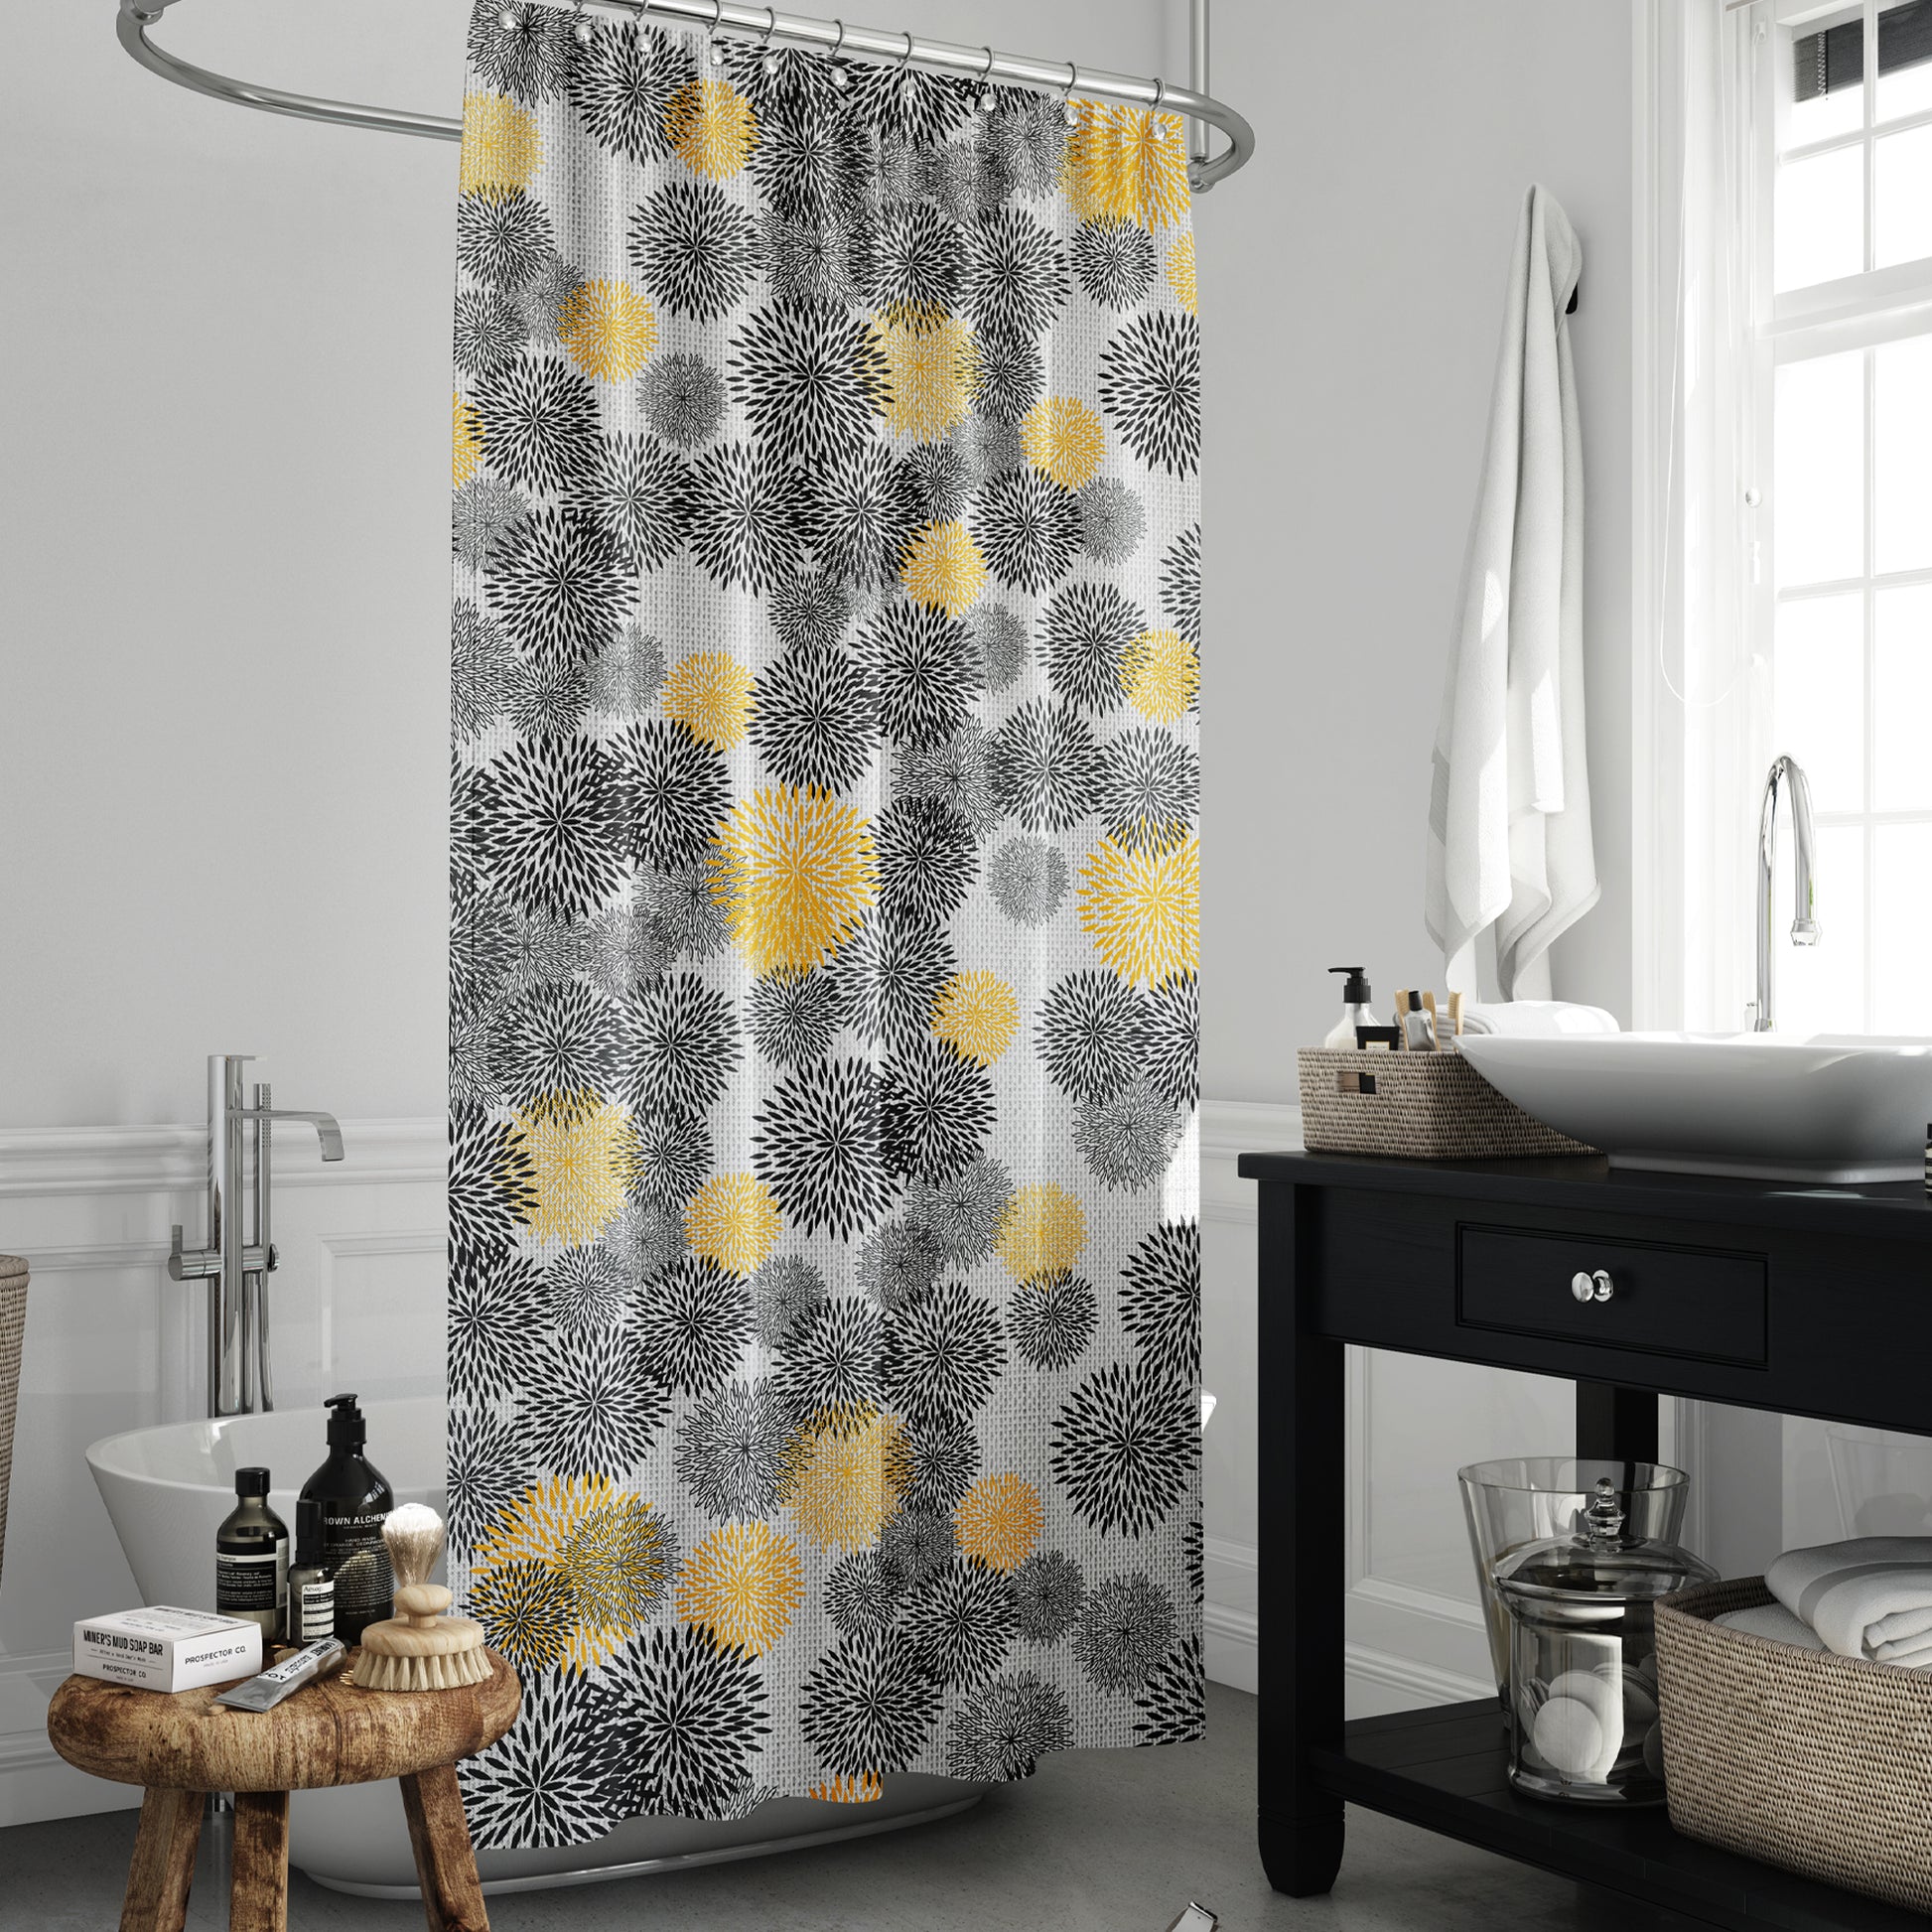 Weighted shower curtain